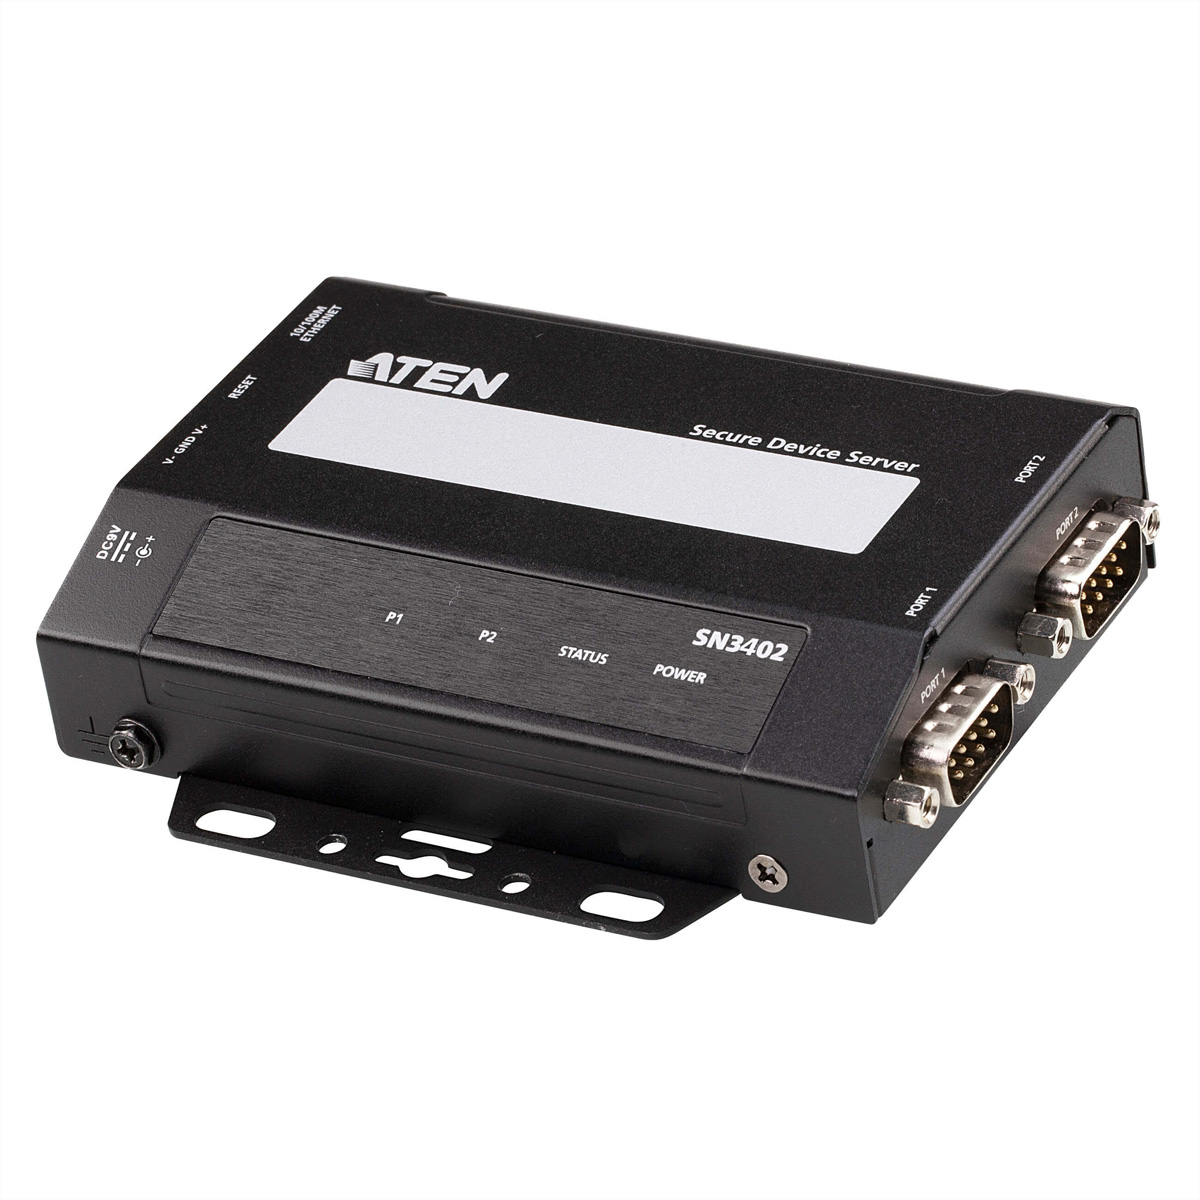 ATEN SN3402 2-Port RS-232/422/485 Secure Device Server